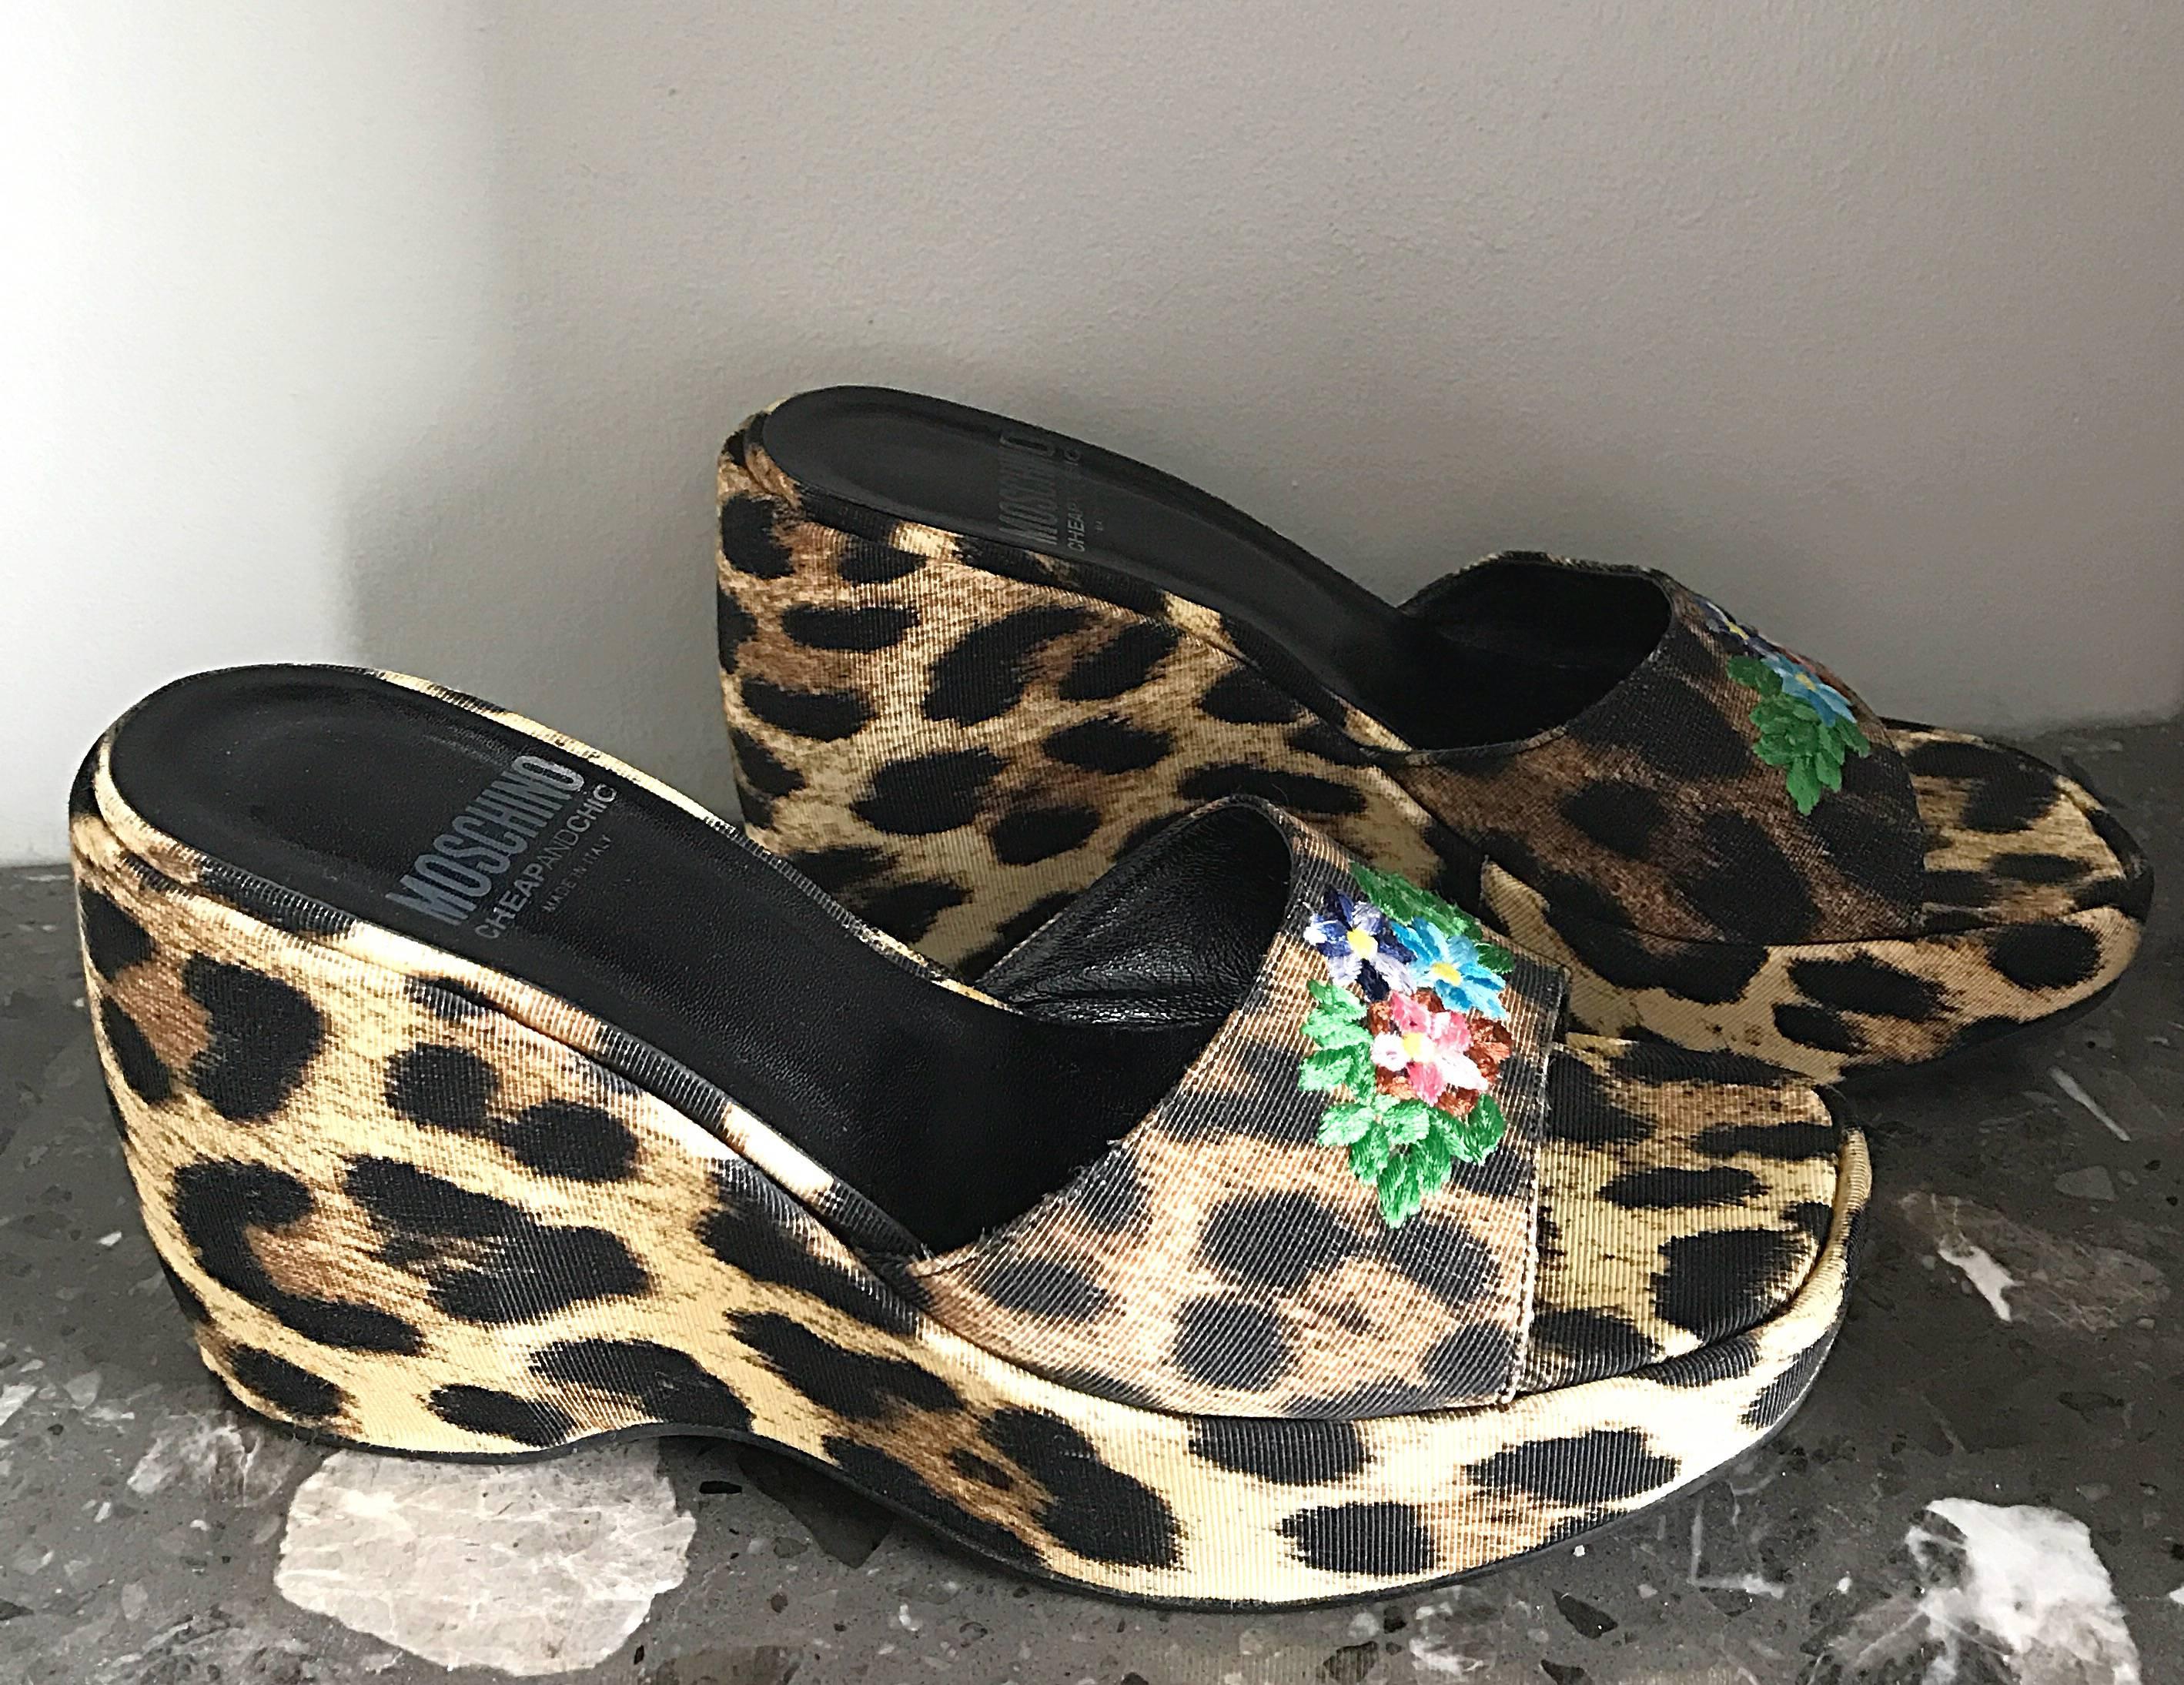 Never worn vintage 90s MOSCHINO Cheap & Chic leopard print slide wedges! Features an allover leopard print, with embroidered flowers. Comfortable, yet super stylish! Platform sole makes walking in these sandals easy! Can easily be dressed up or